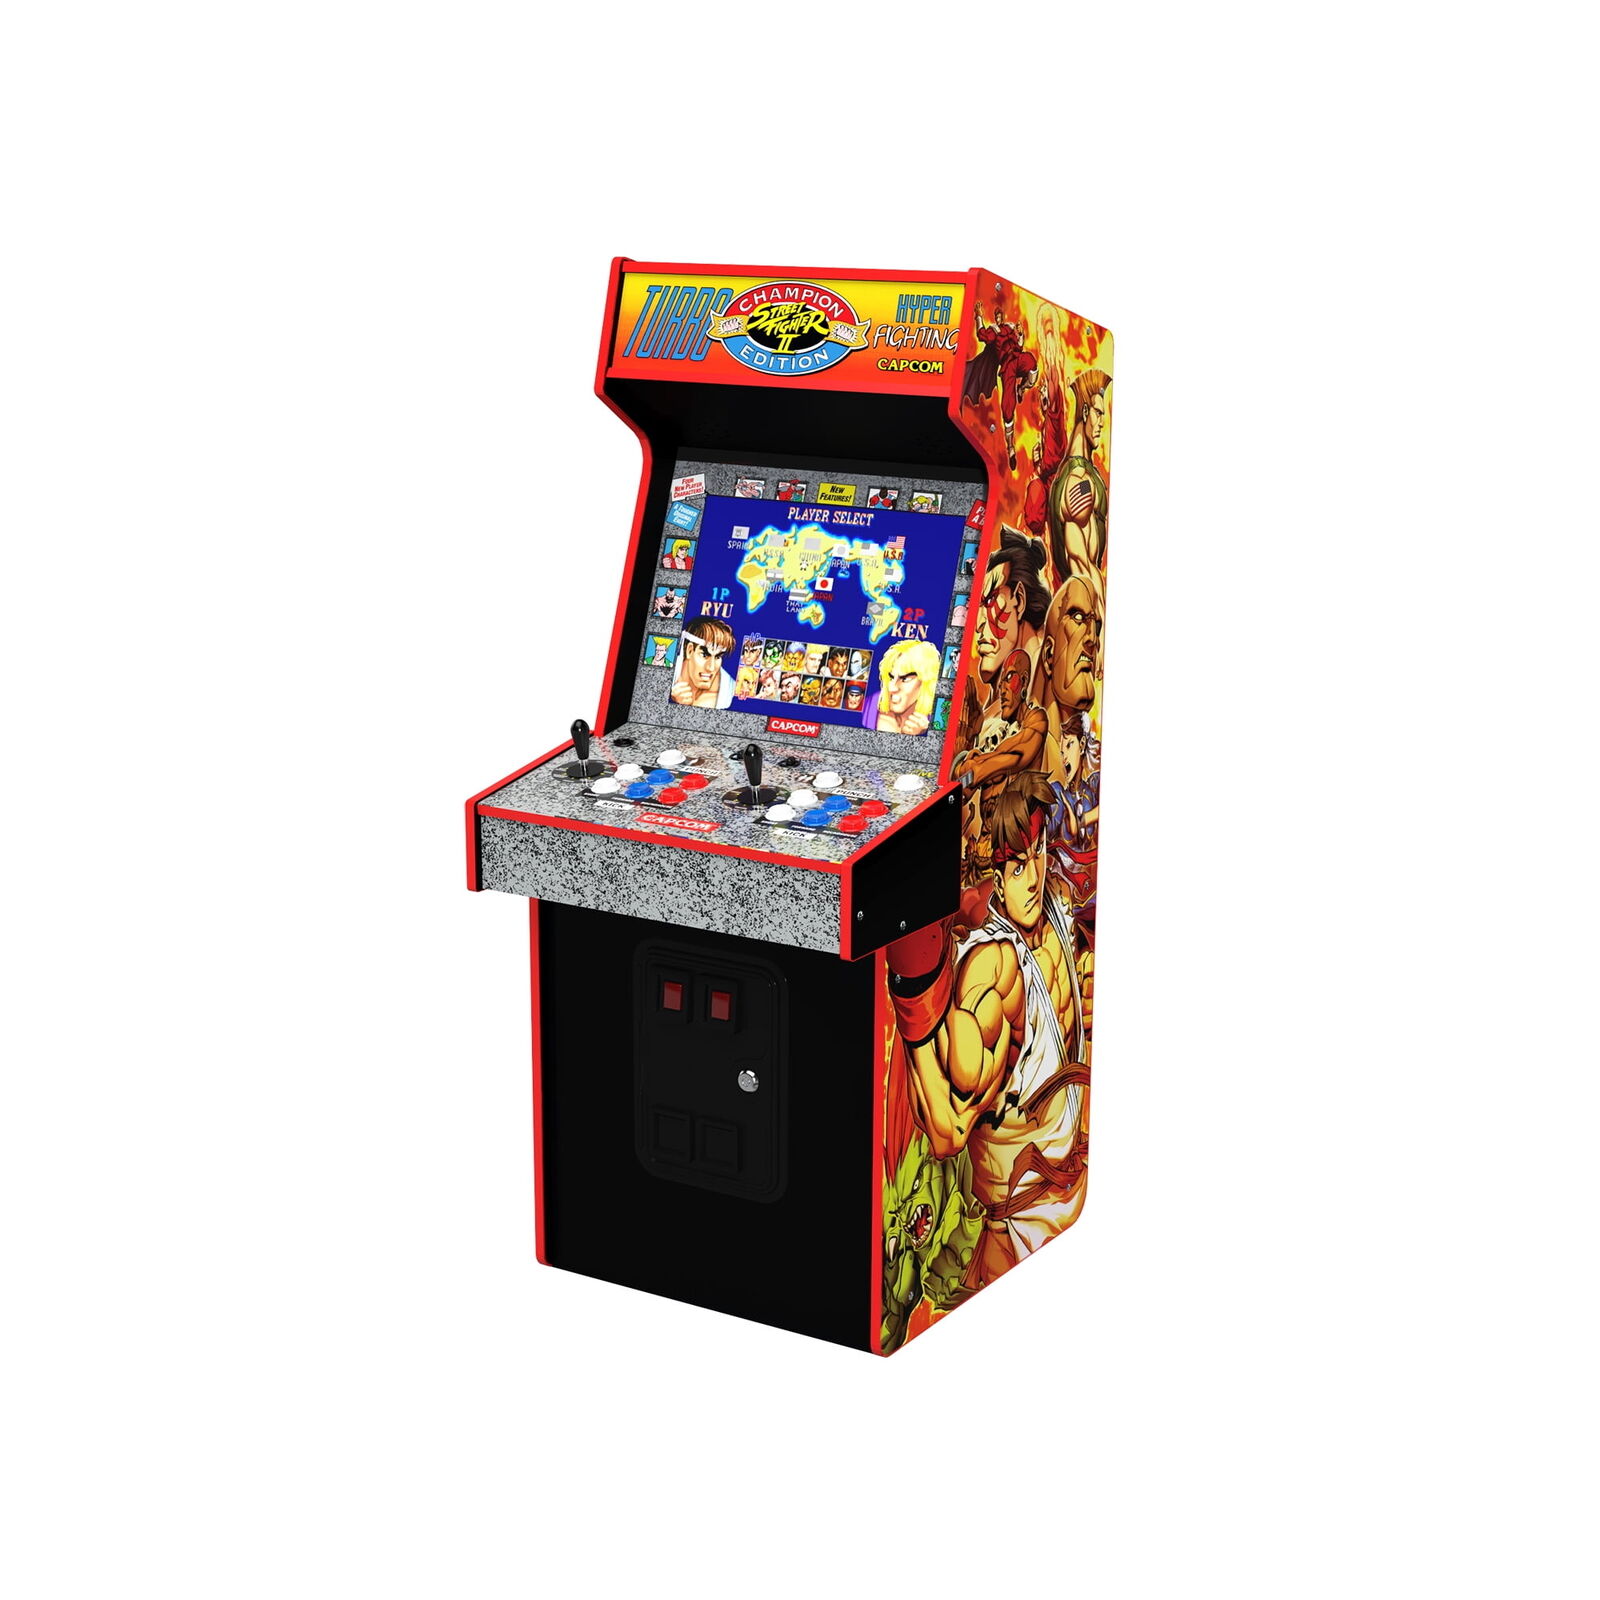 Capcom Legacy Arcade Game Machine Classic Style Yoga Flame Edition With WIFI NEW